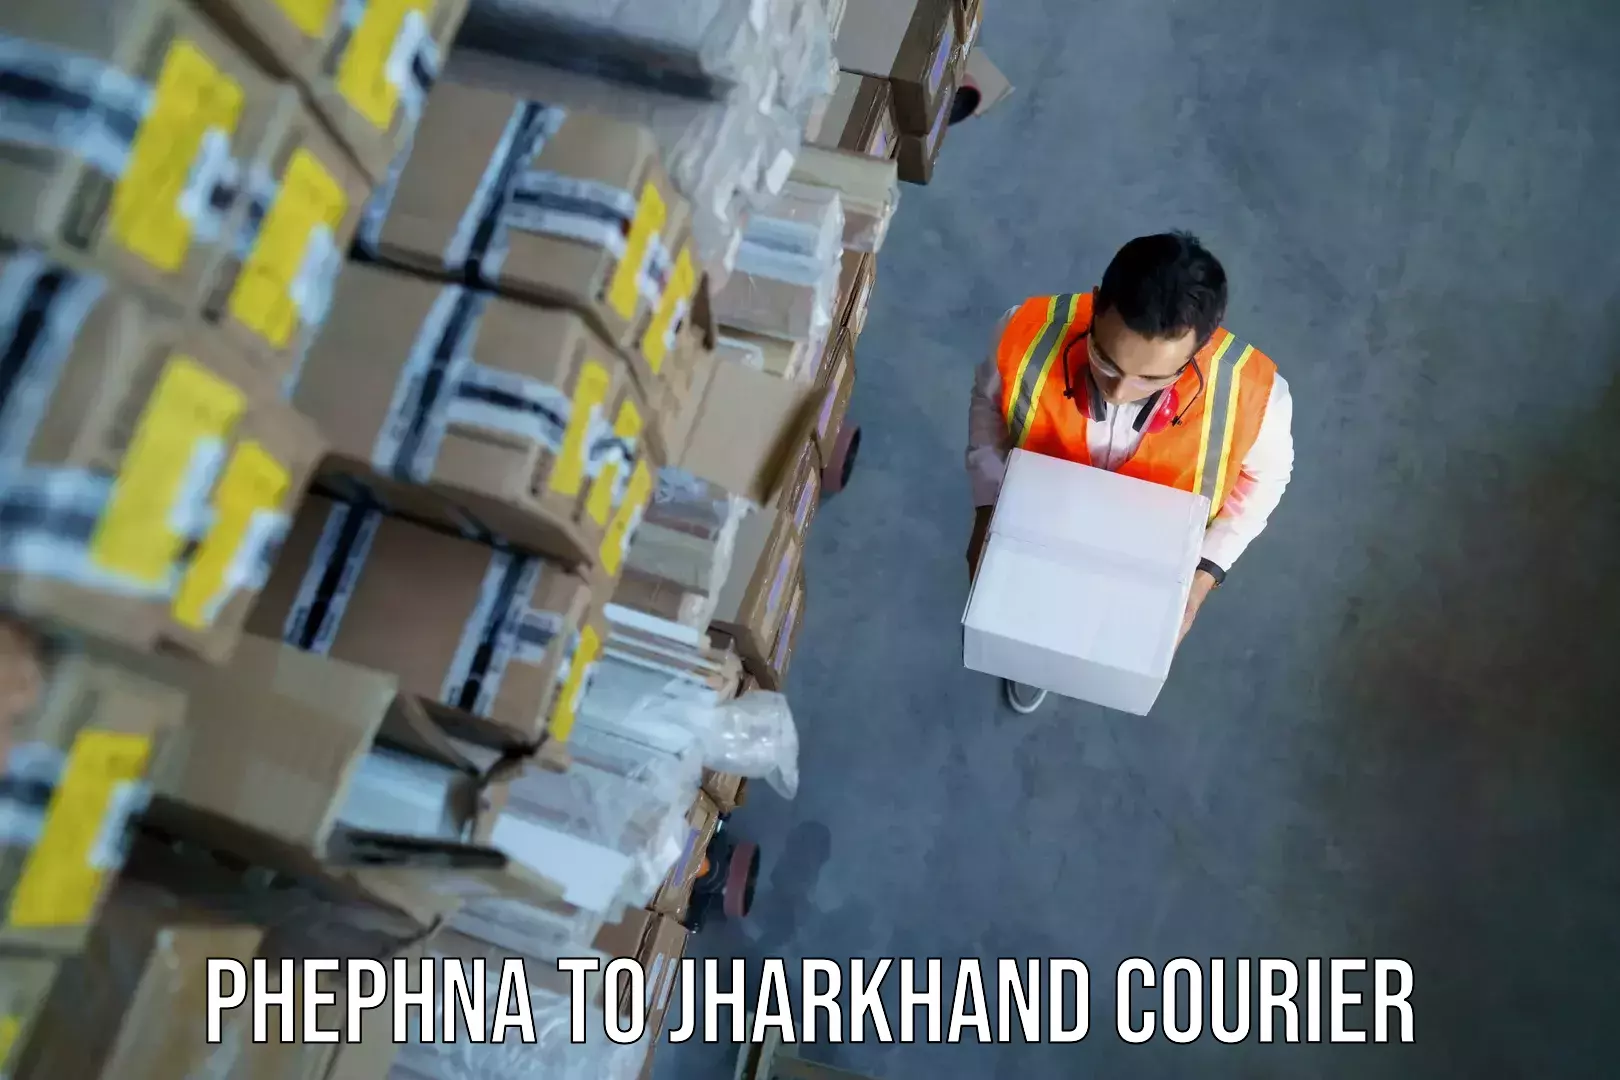 Baggage shipping service Phephna to Jharkhand